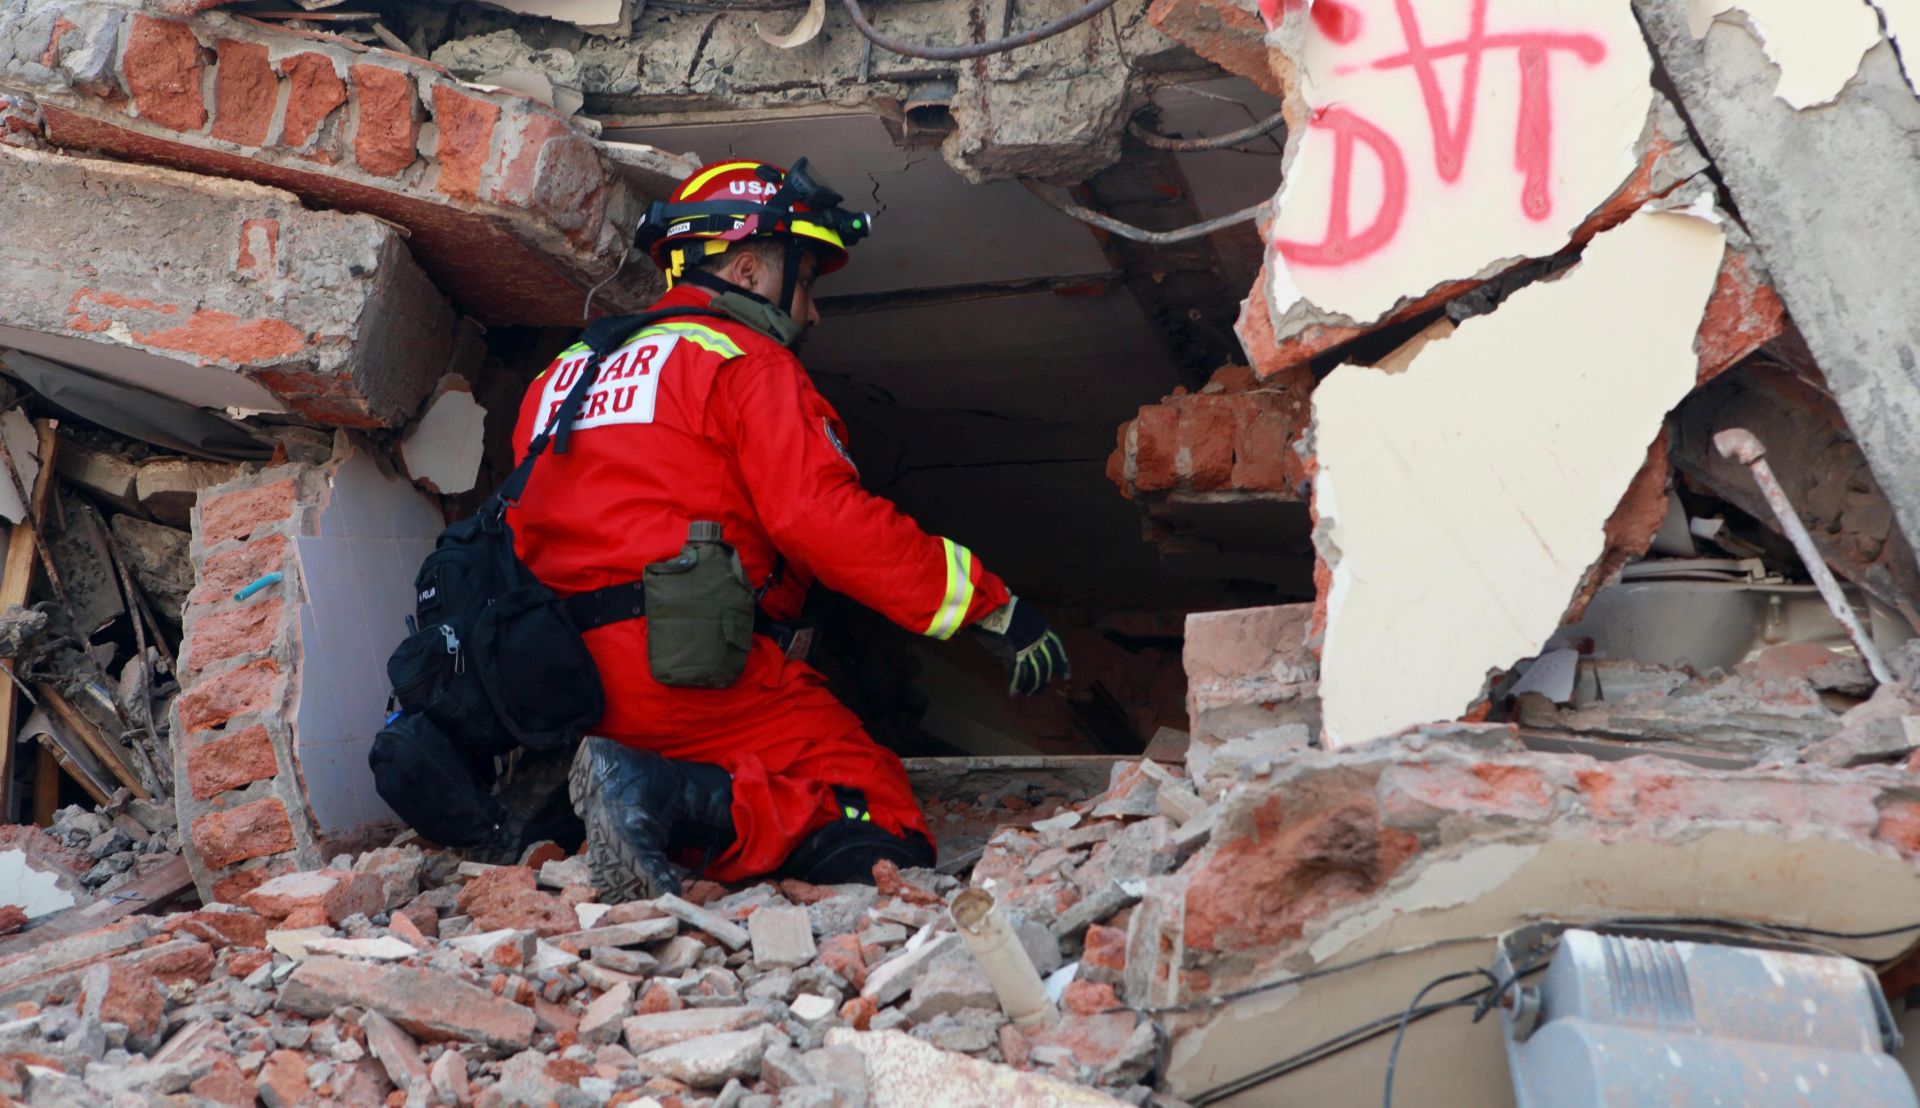 epa05266038 Rescue workers look for survivors in a hotel in Tarqui, Manta, Ecuador, on 18 April 2016. A 7.8 magnitude earthquake on the richter scale affected the northwest region of Ecuador, on 16 April 2016, leaving 350 people dead and more than 2068 injured according to Government data.  EPA/CHRISTIAN ESCOBAR MORA